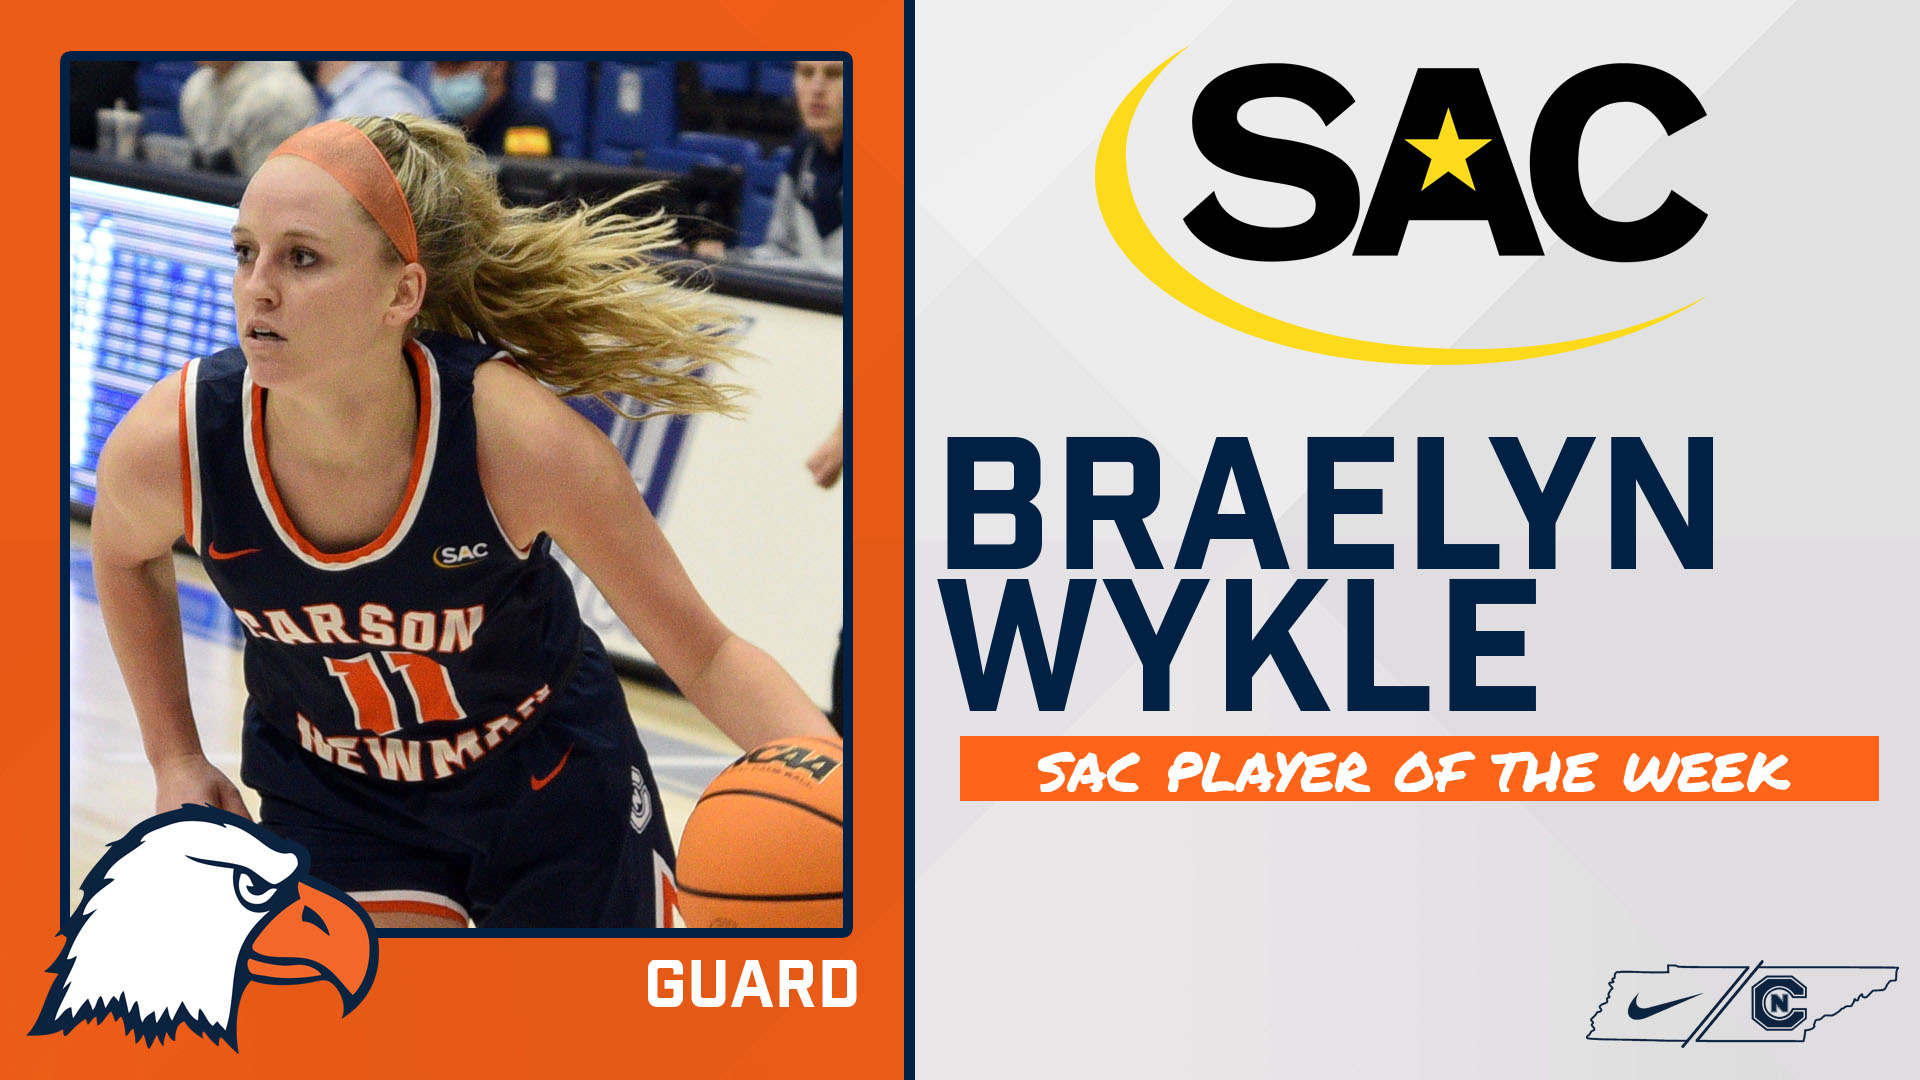 Wykle snares fifth career SAC Player of the Week